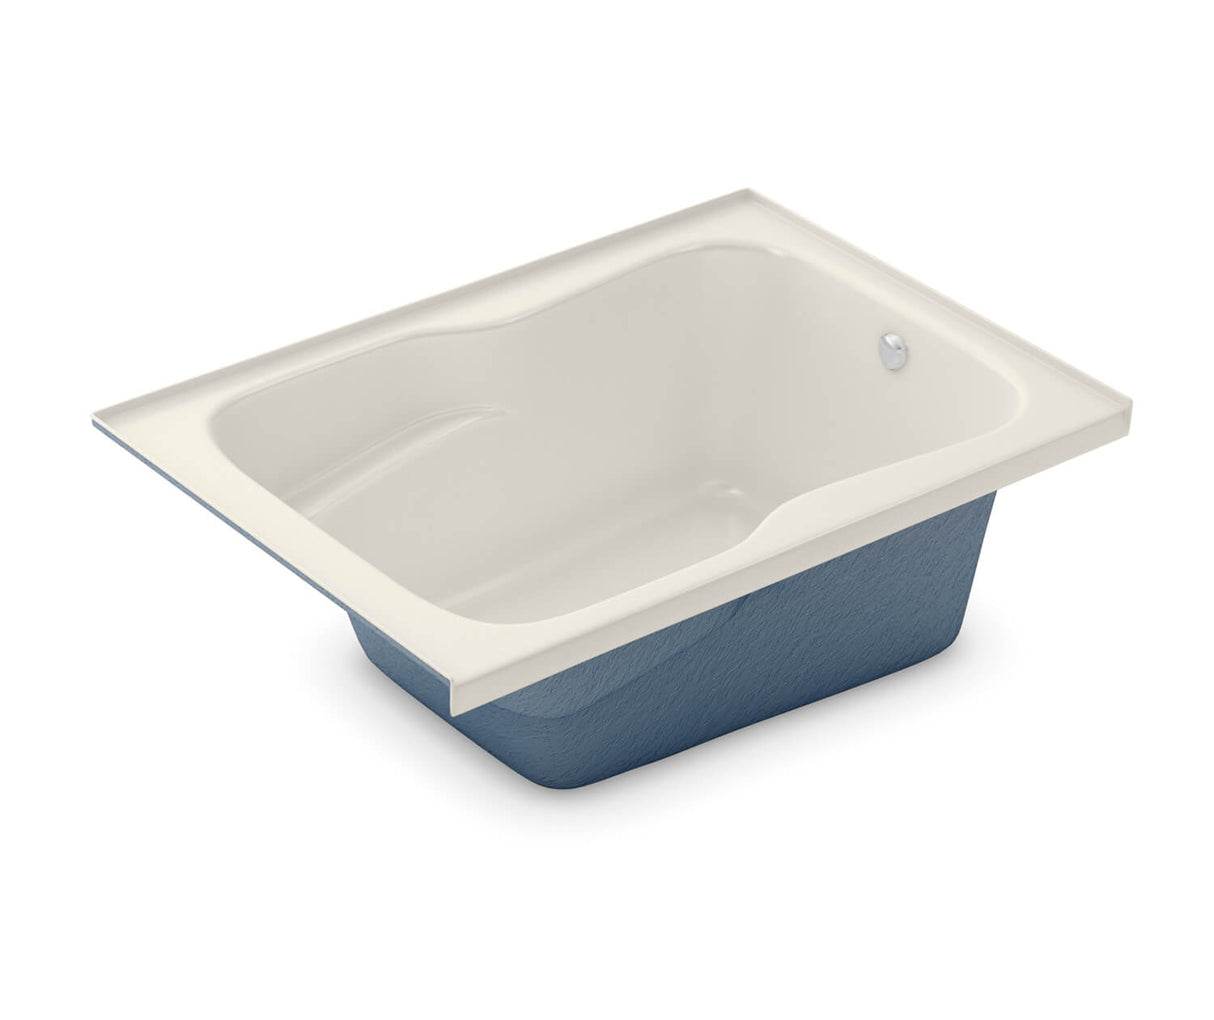 Aker SBF-3660 AcrylX Alcove Left-Hand Drain Homestead Bath in Biscuit